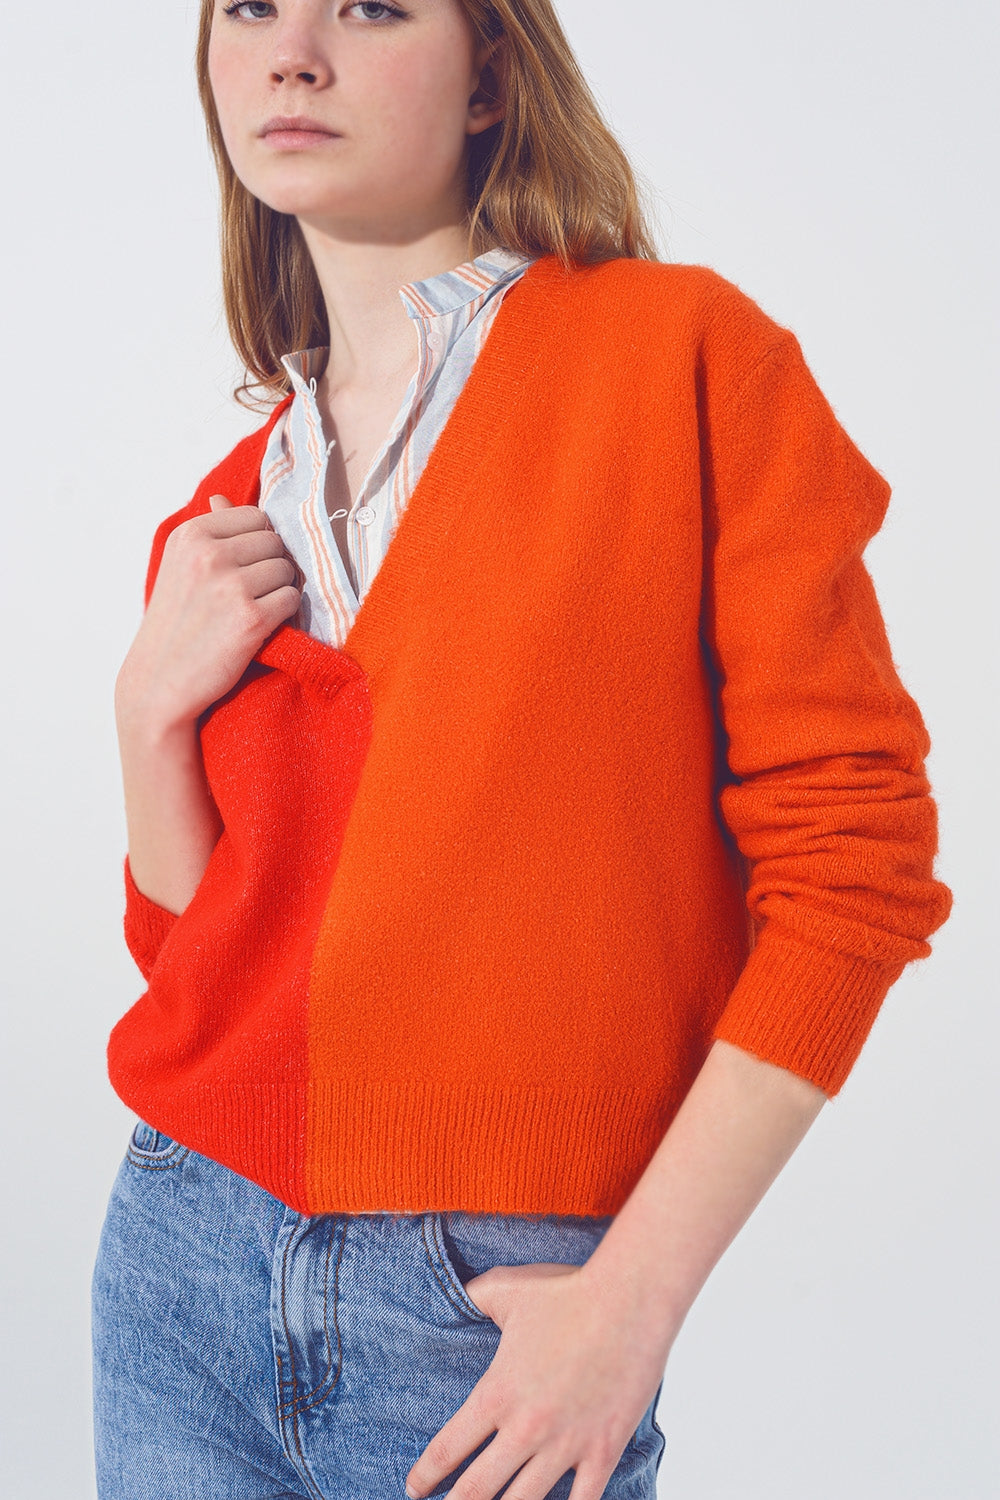 V Neck Colorblock Sweater in Red and Orange